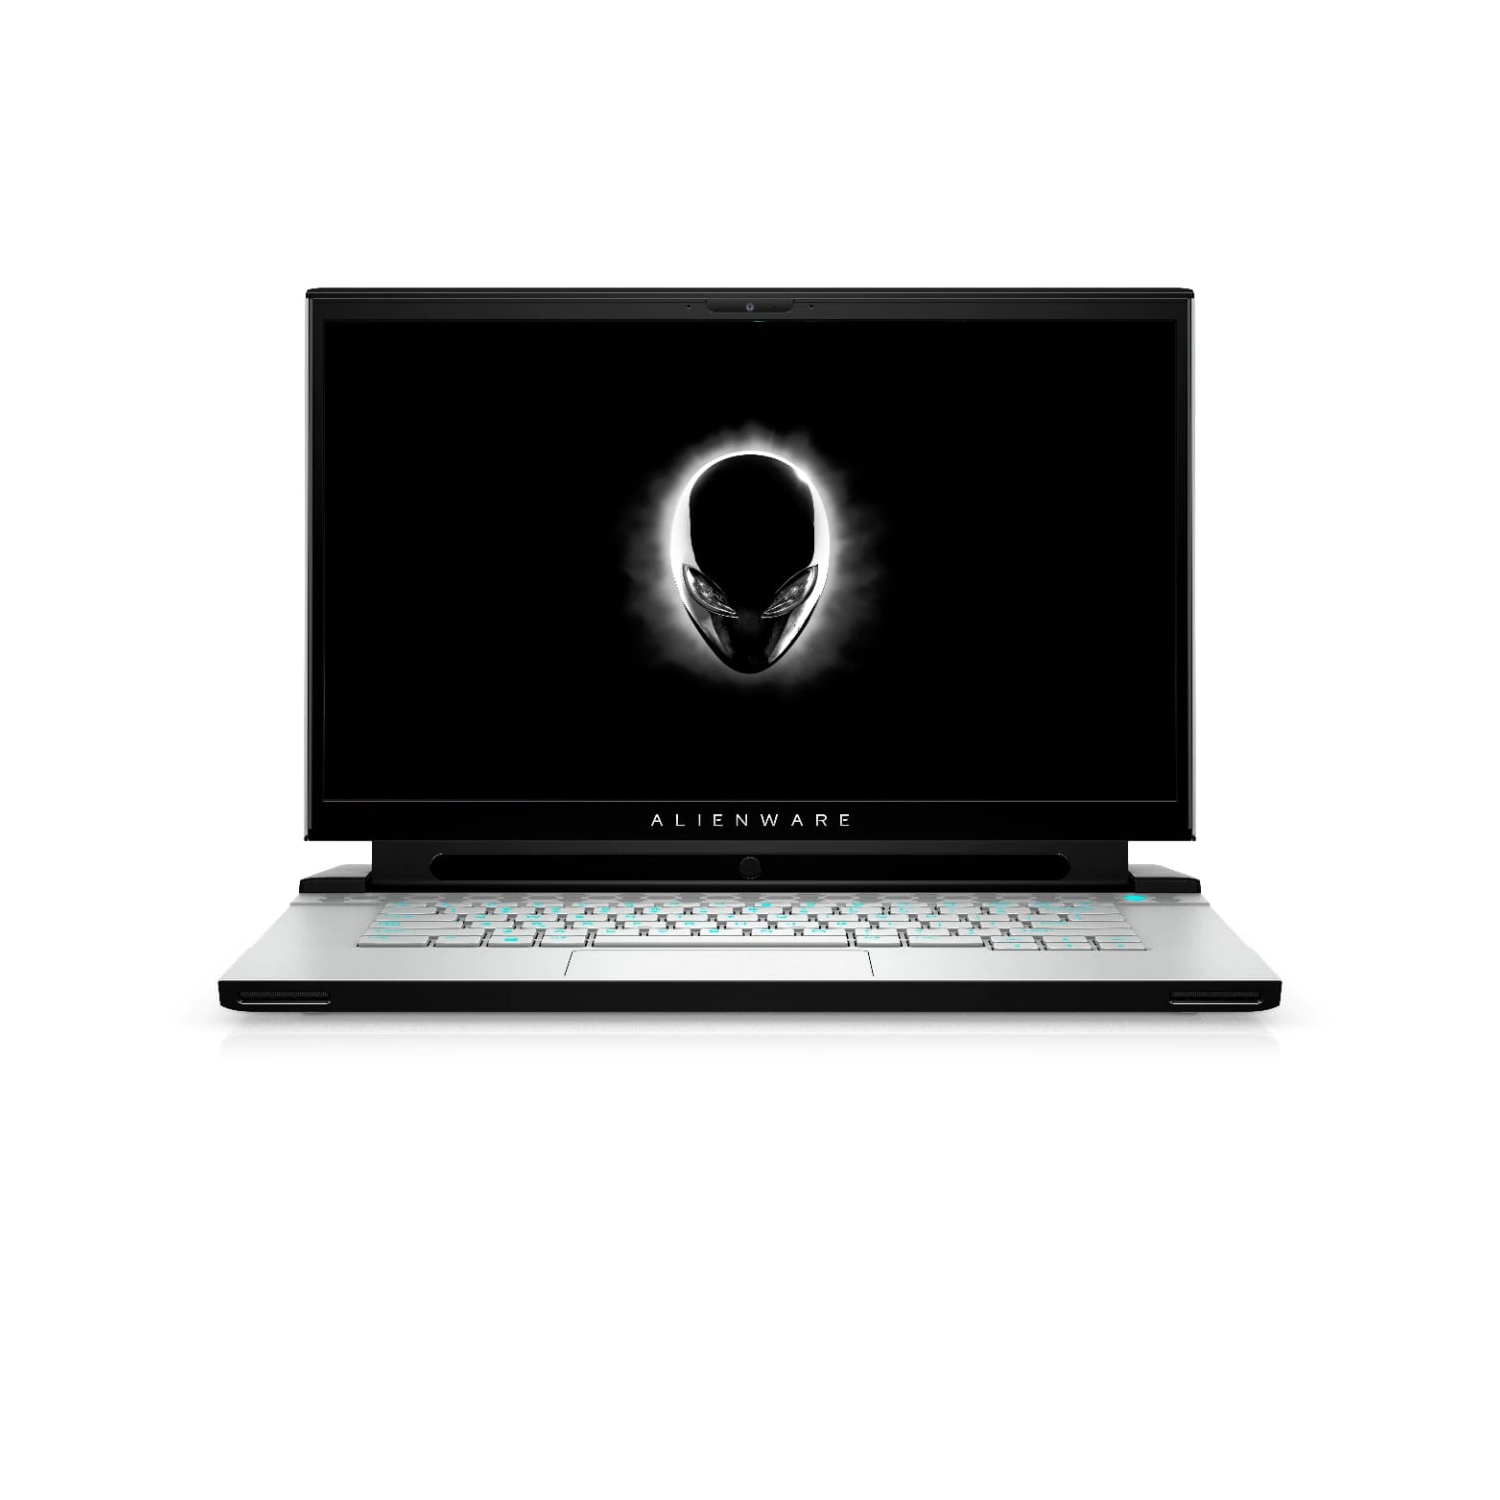 Refurbished (Excellent) - Dell Alienware m15 R3 Gaming Laptop (2020), 15.6" FHD, Core i7, 1TB SSD, 16GB RAM, RTX 2060, 6 Cores @ 5 GHz, 10th Gen CPU Certified Refurbished